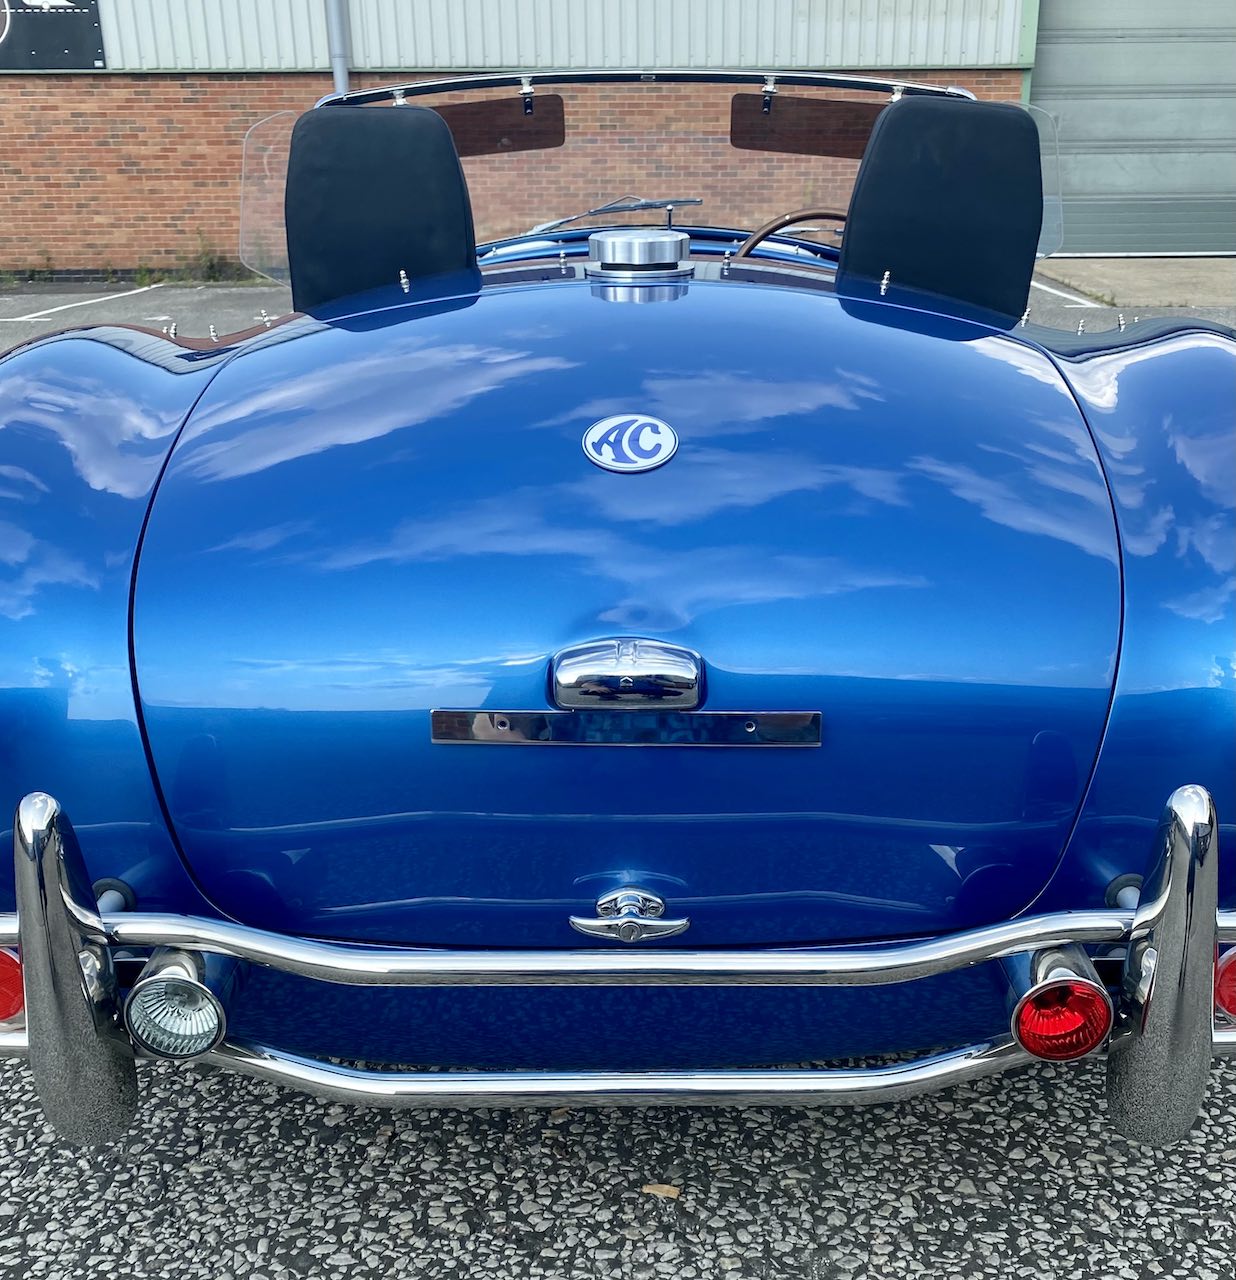 AC Cars fires up first AC Cobra Series 1 Electric